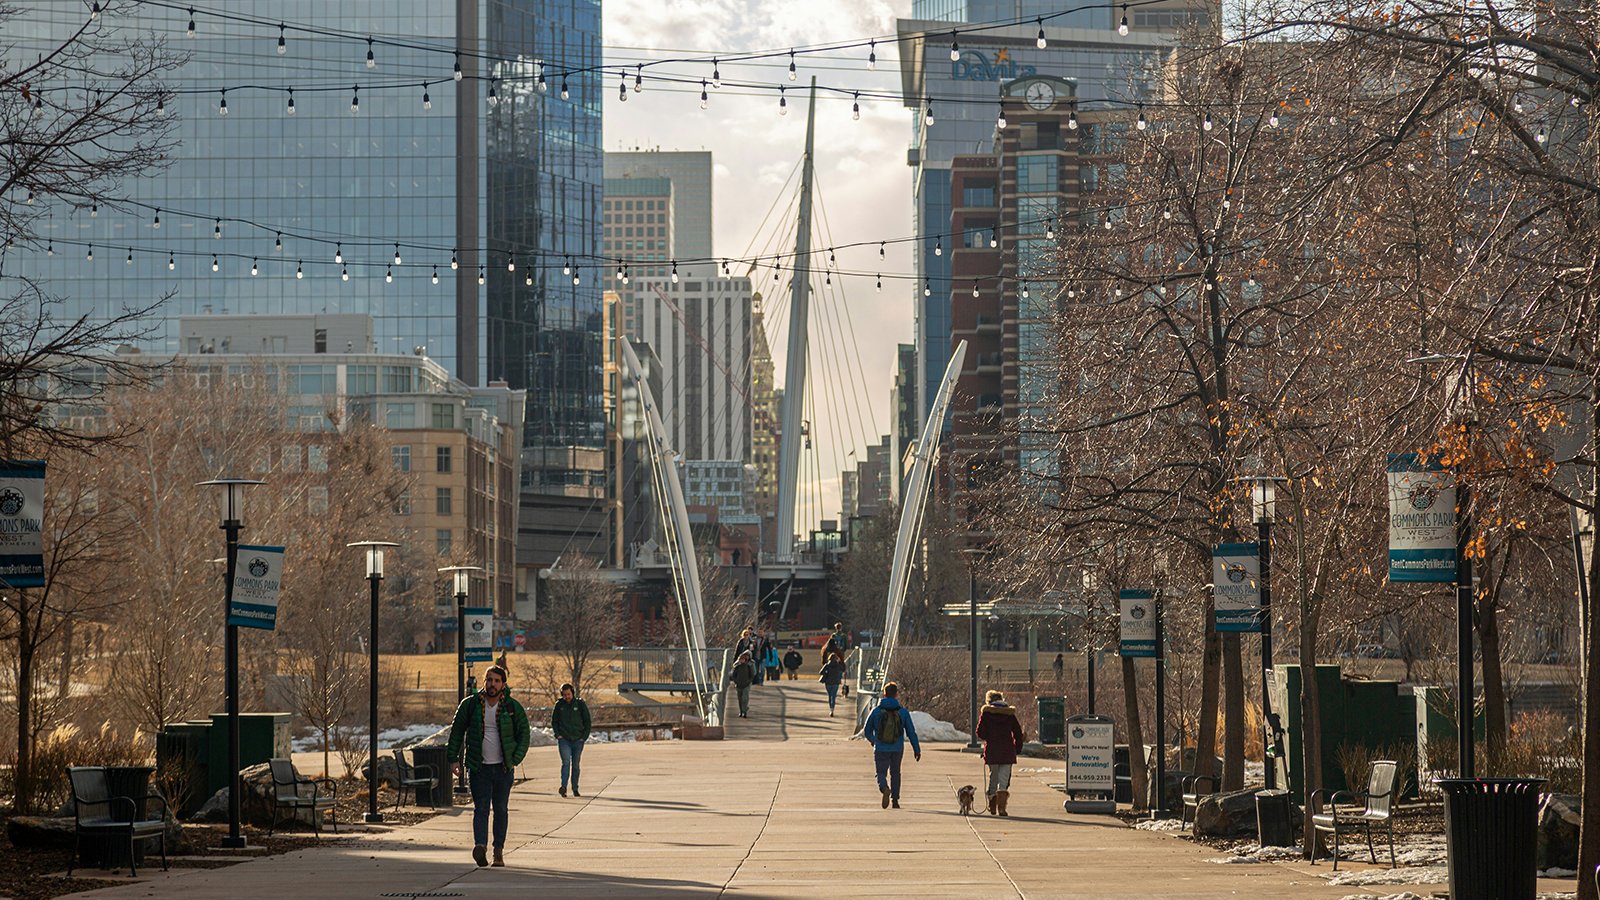 A street level view of the LoDo neighborhood in Denver, CO.